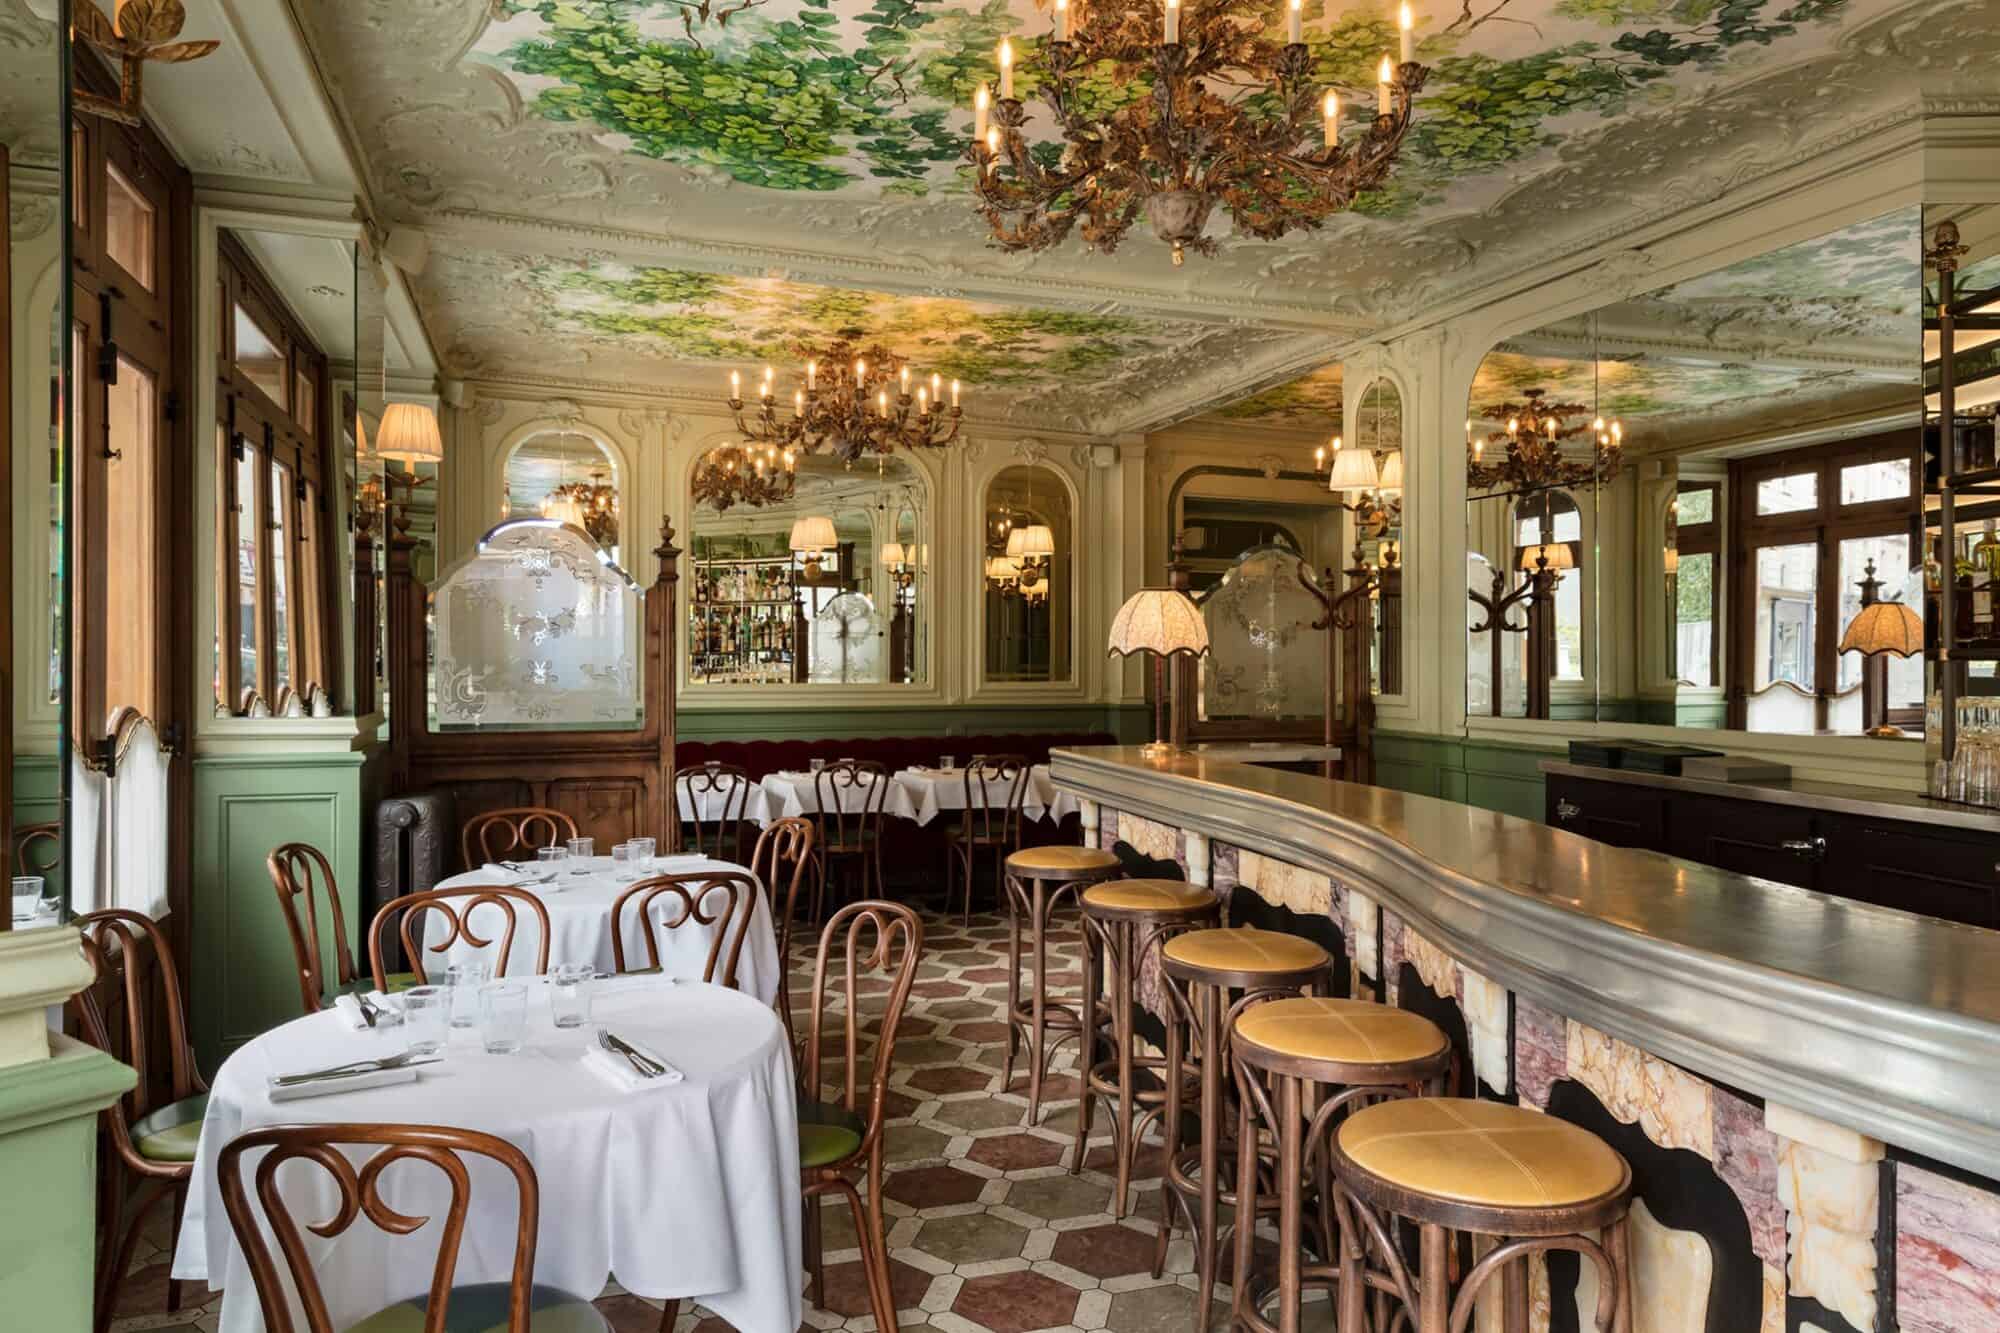 The interior of Le Chardenoux restaurant, decorated with beautiful gold chandeliers and green detailing on the walls and ceiling.